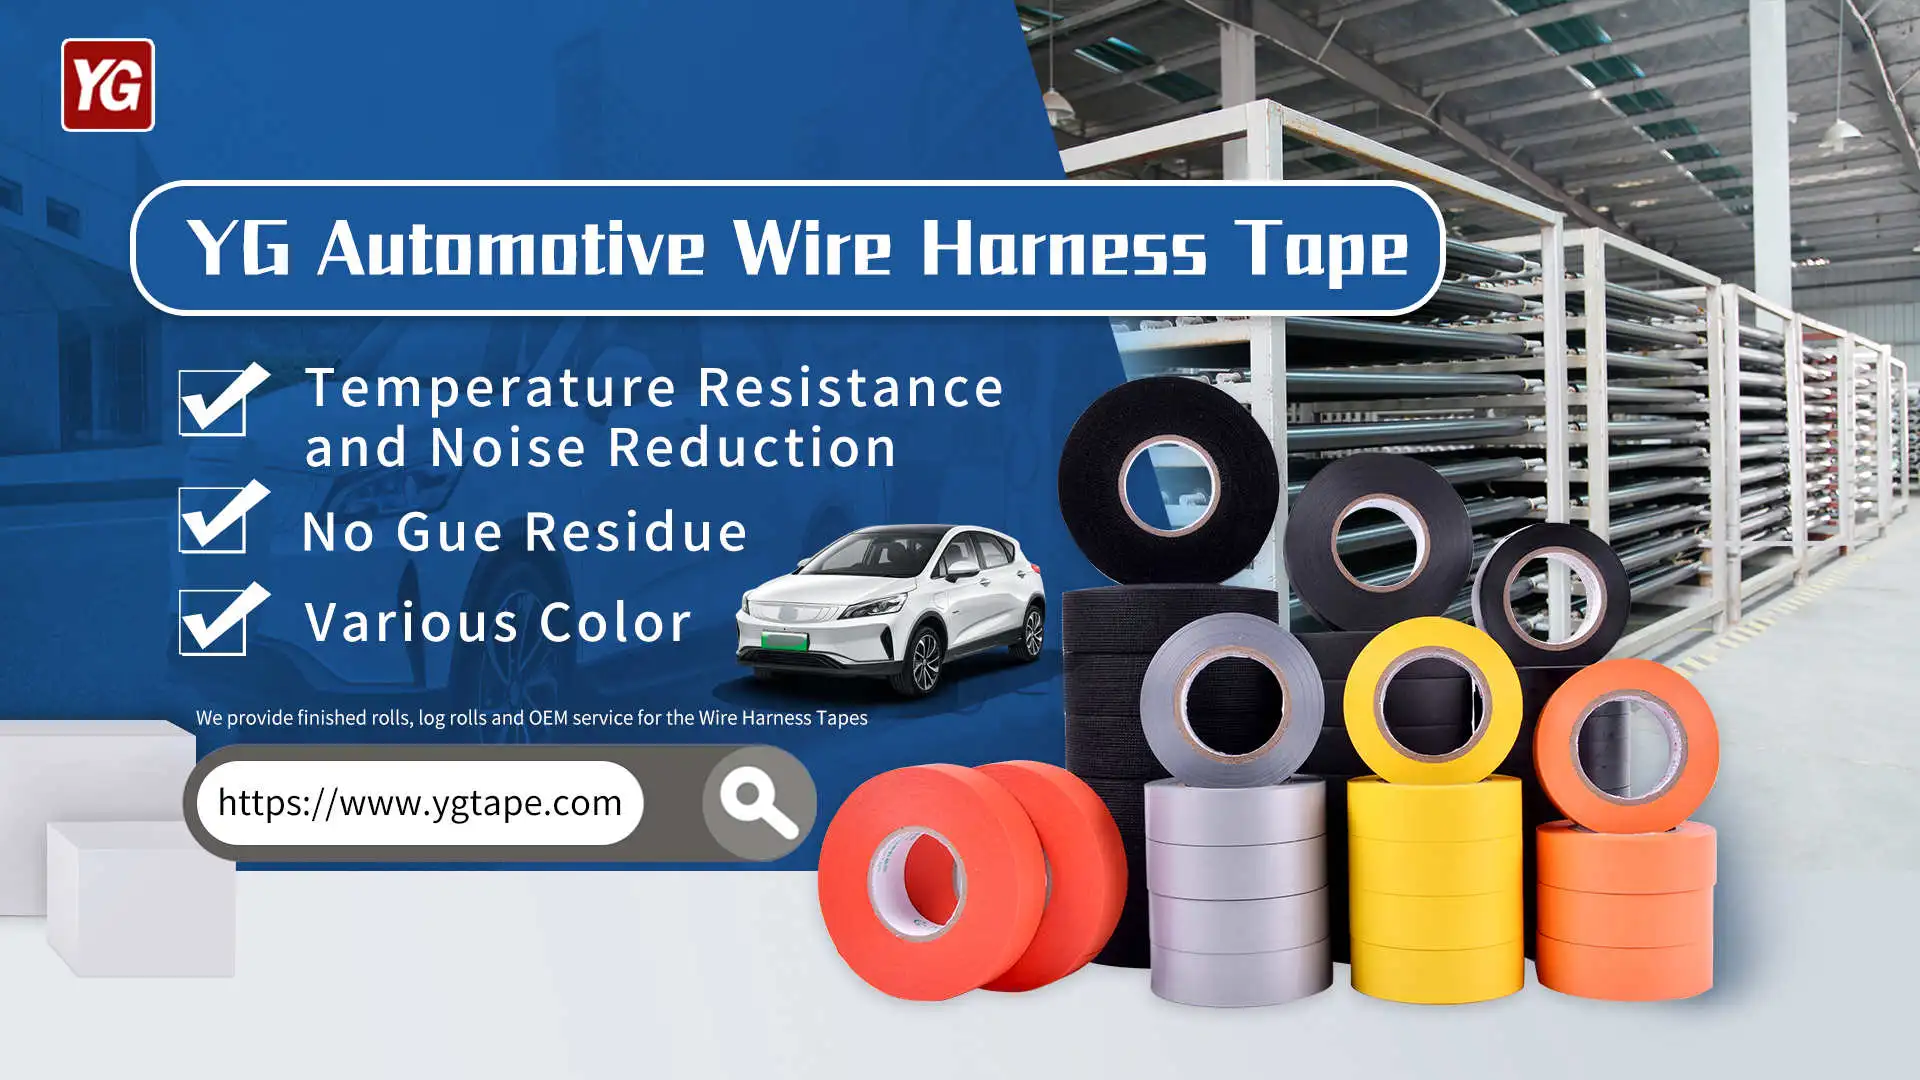 Wire Harness Tape